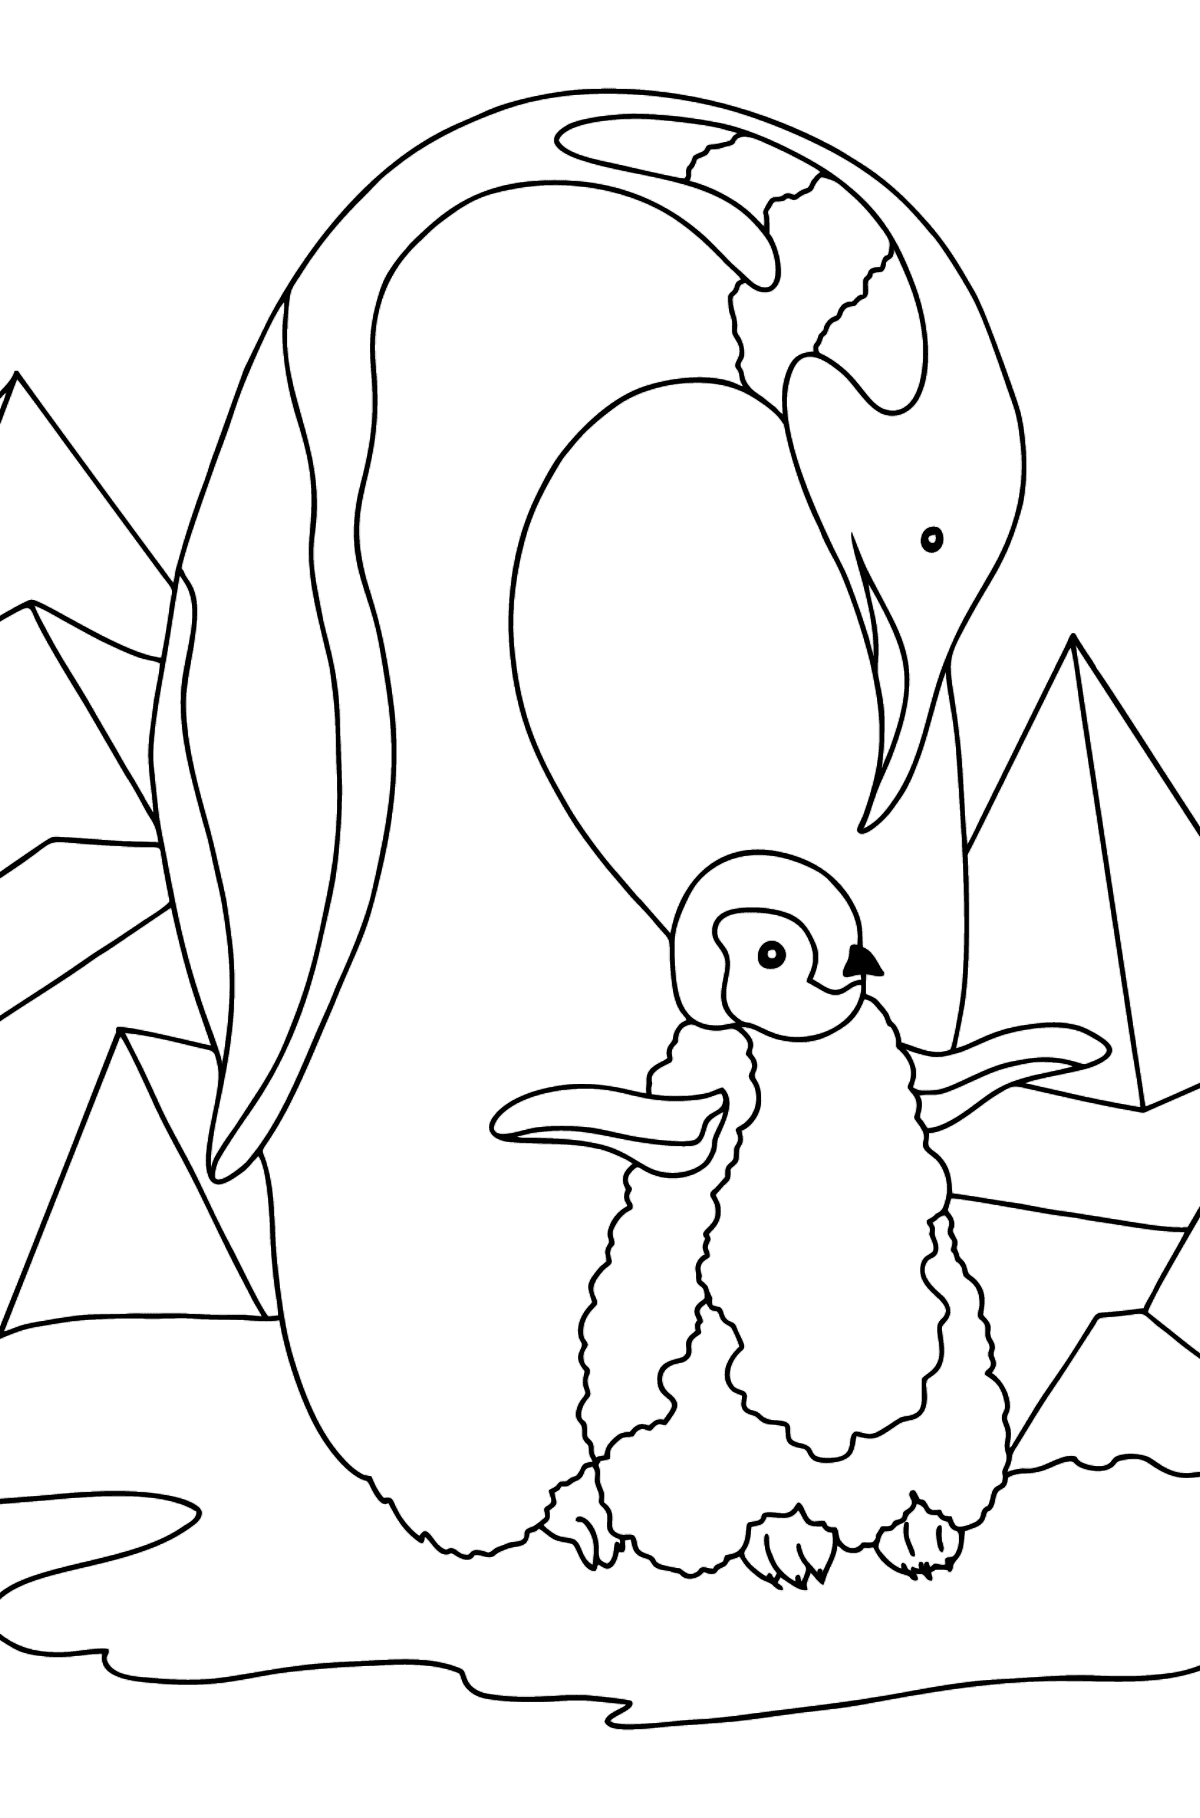 Coloring Page - A Penguin with a Penguin Chick - Coloring Pages for Kids